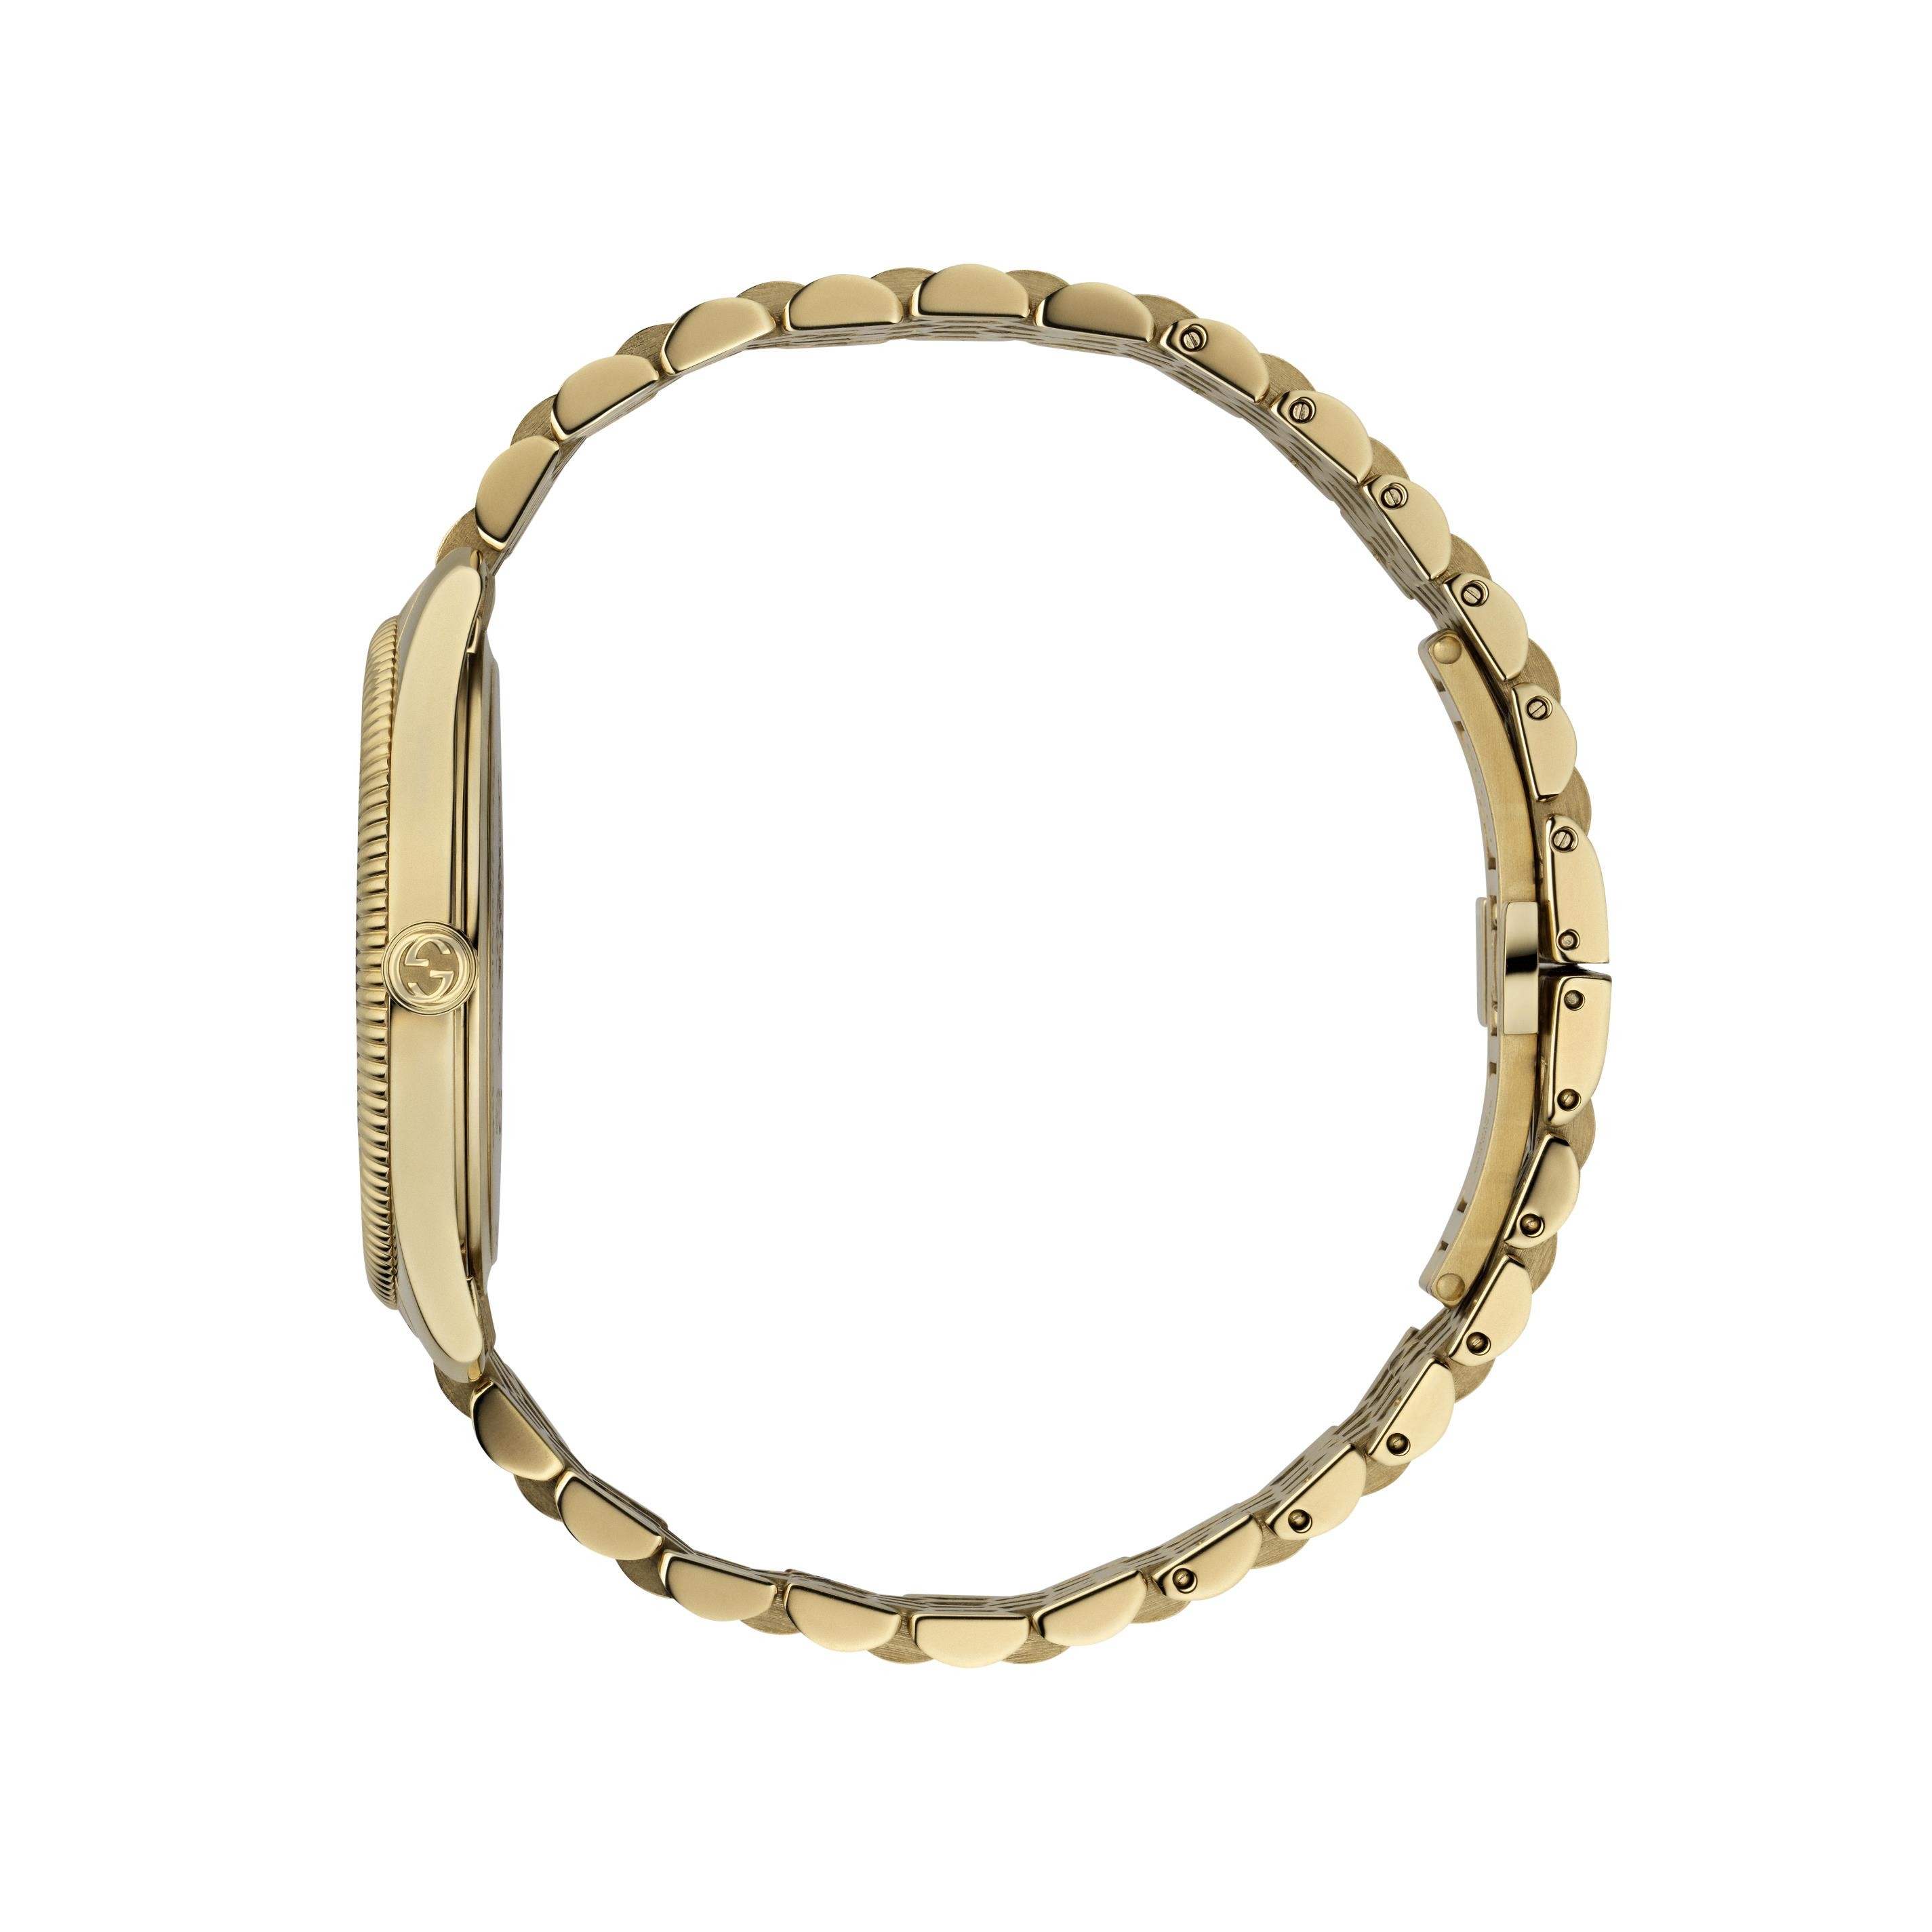 G-Timeless Gold PVD Stainless Steel Bracelet Watch 